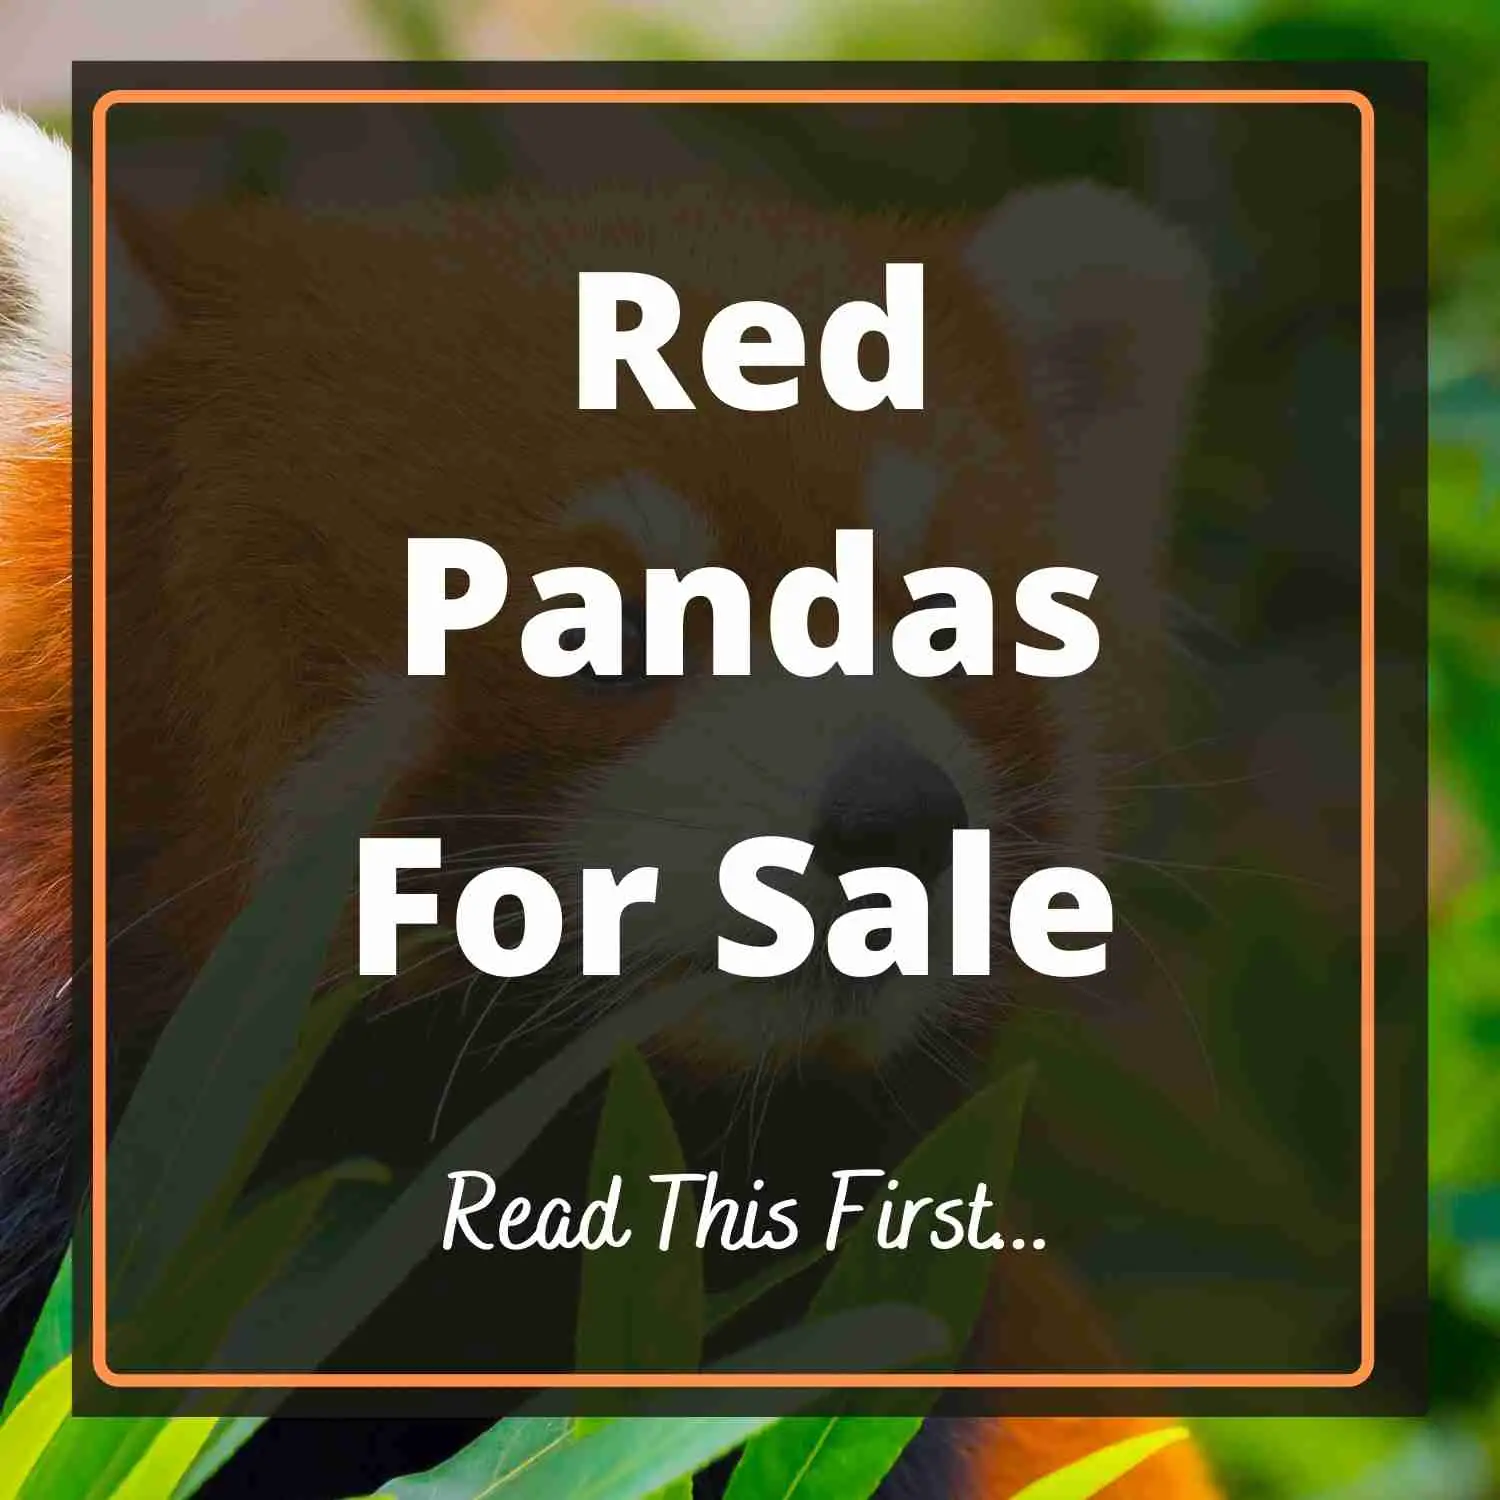 Red Pandas For Sale Blog